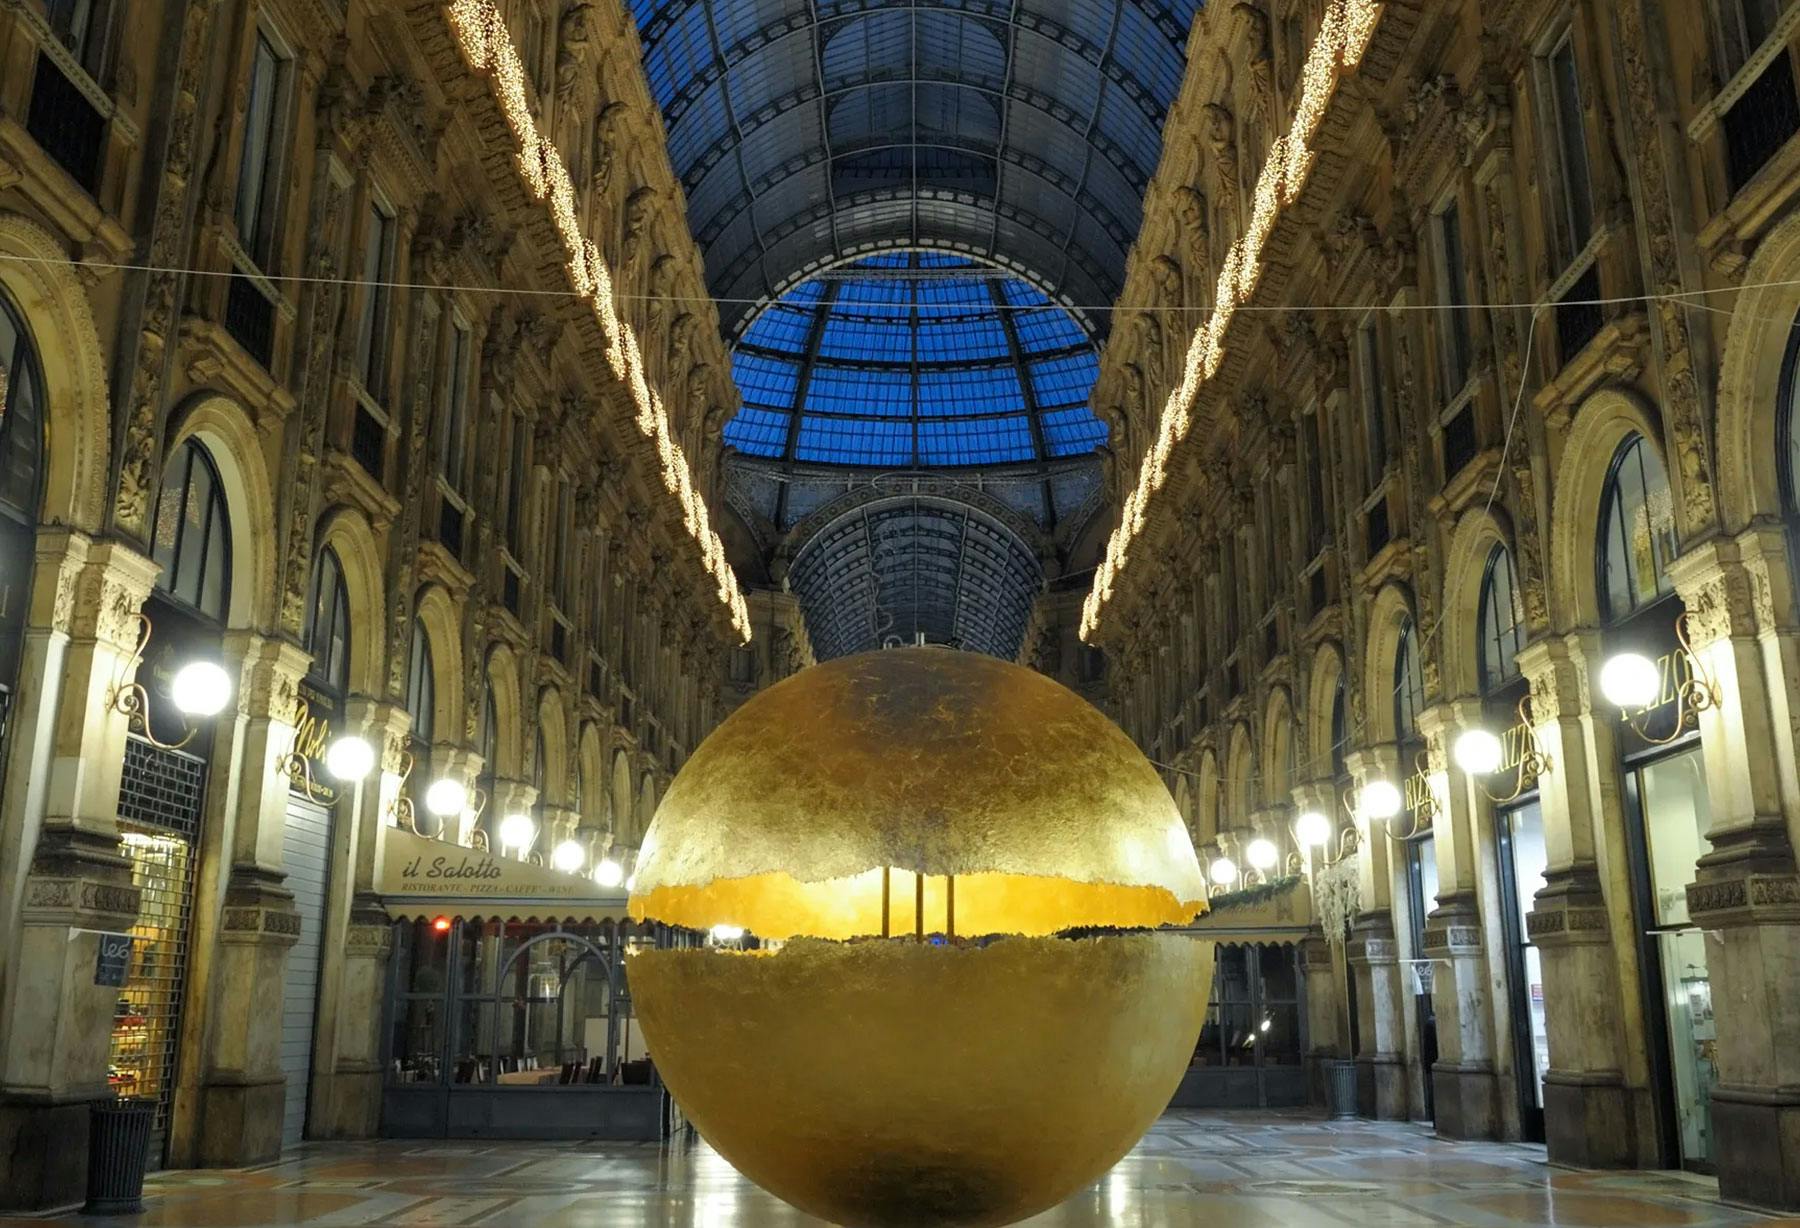 <p>“PostKrisi” installation at the Galleria Vittorio Emanuele in Milan. A big sphere lying on the ground, luminous and massive, completely covered with gold coloured leaf. A mix of ancient value and modern technology.</p>
